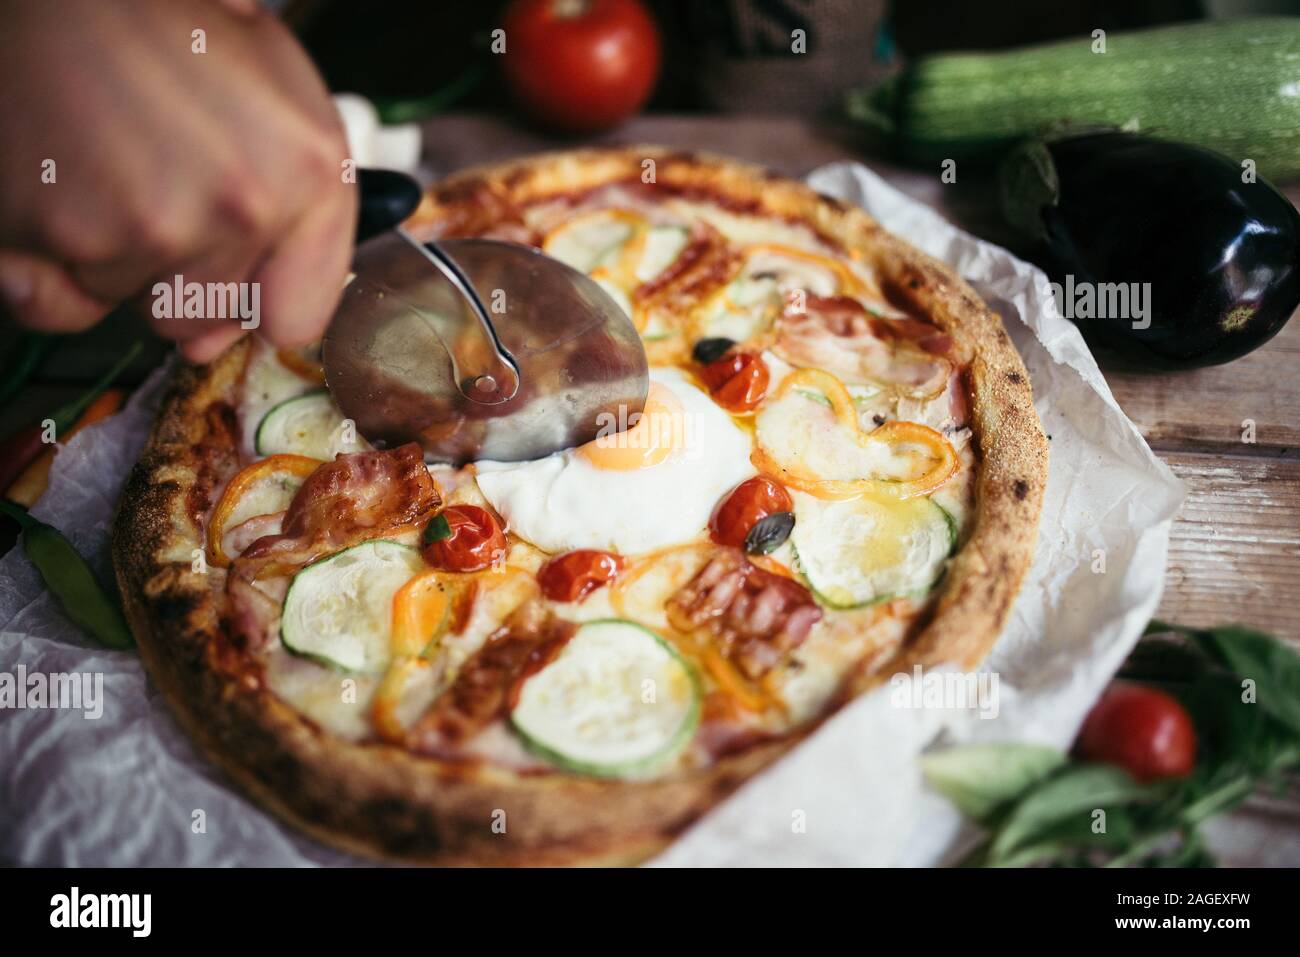 Sliced egg on the pizza in a restaruant. Stock Photo